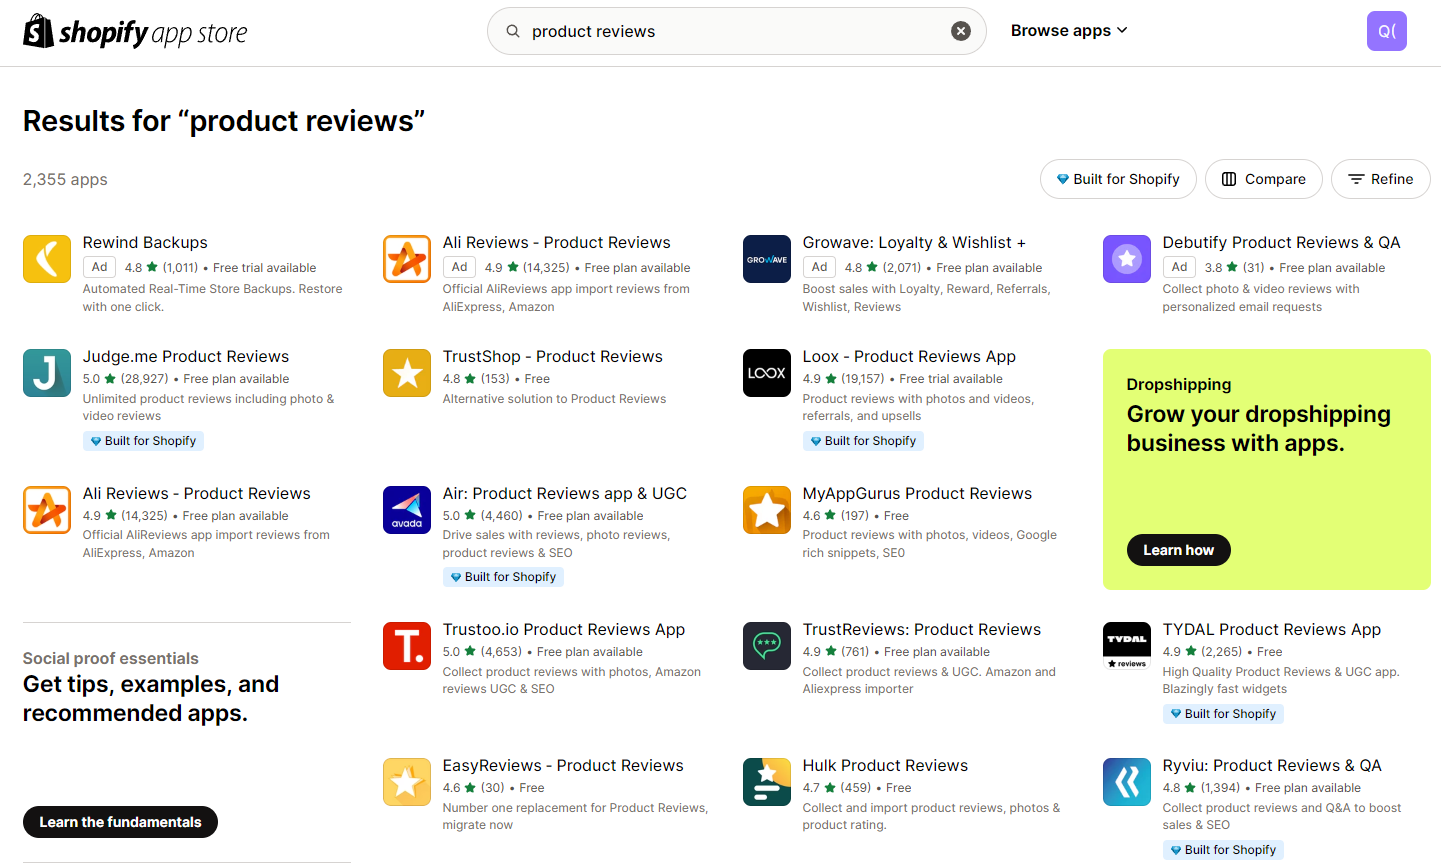 Search for Product Reviews app in the App Store